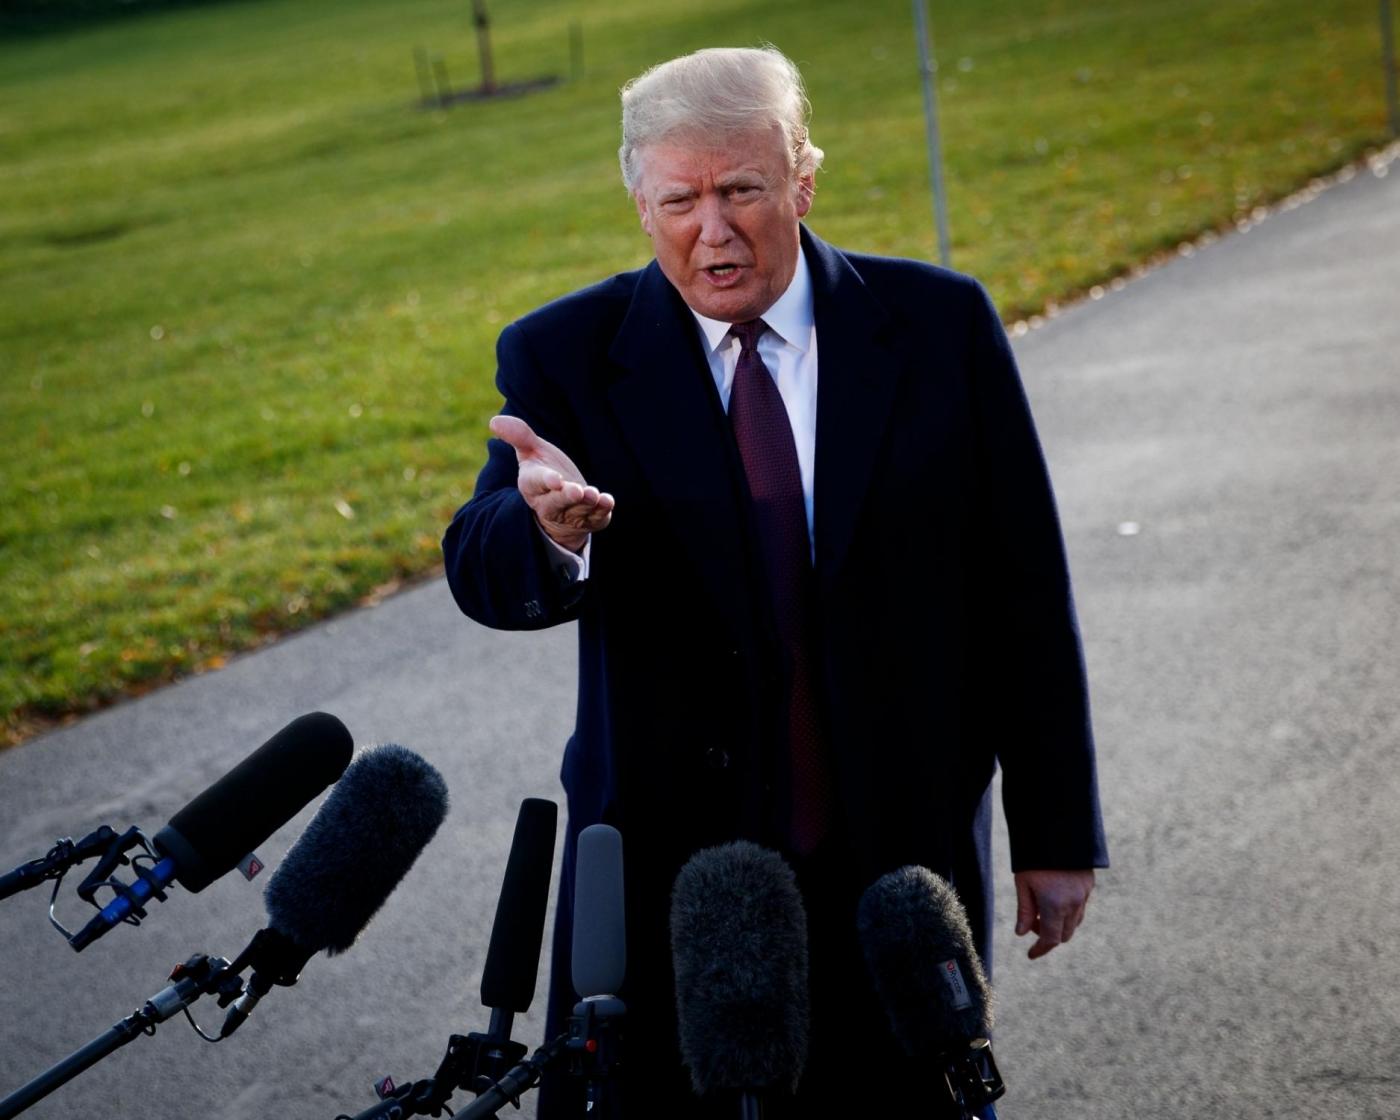 WASHINGTON, Nov. 20, 2018 (Xinhua) -- U.S. President Donald Trump speaks to reporters before departing from the White House in Washington D.C., the United States, on Nov. 20, 2018. Donald Trump has submitted written answers to questions from Special Counsel Robert Mueller probing into the alleged Russian meddling in the 2016 U.S. elections, local media on Tuesday quoted the president's attorneys as saying. (Xinhua/Ting Shen/IANS) by .